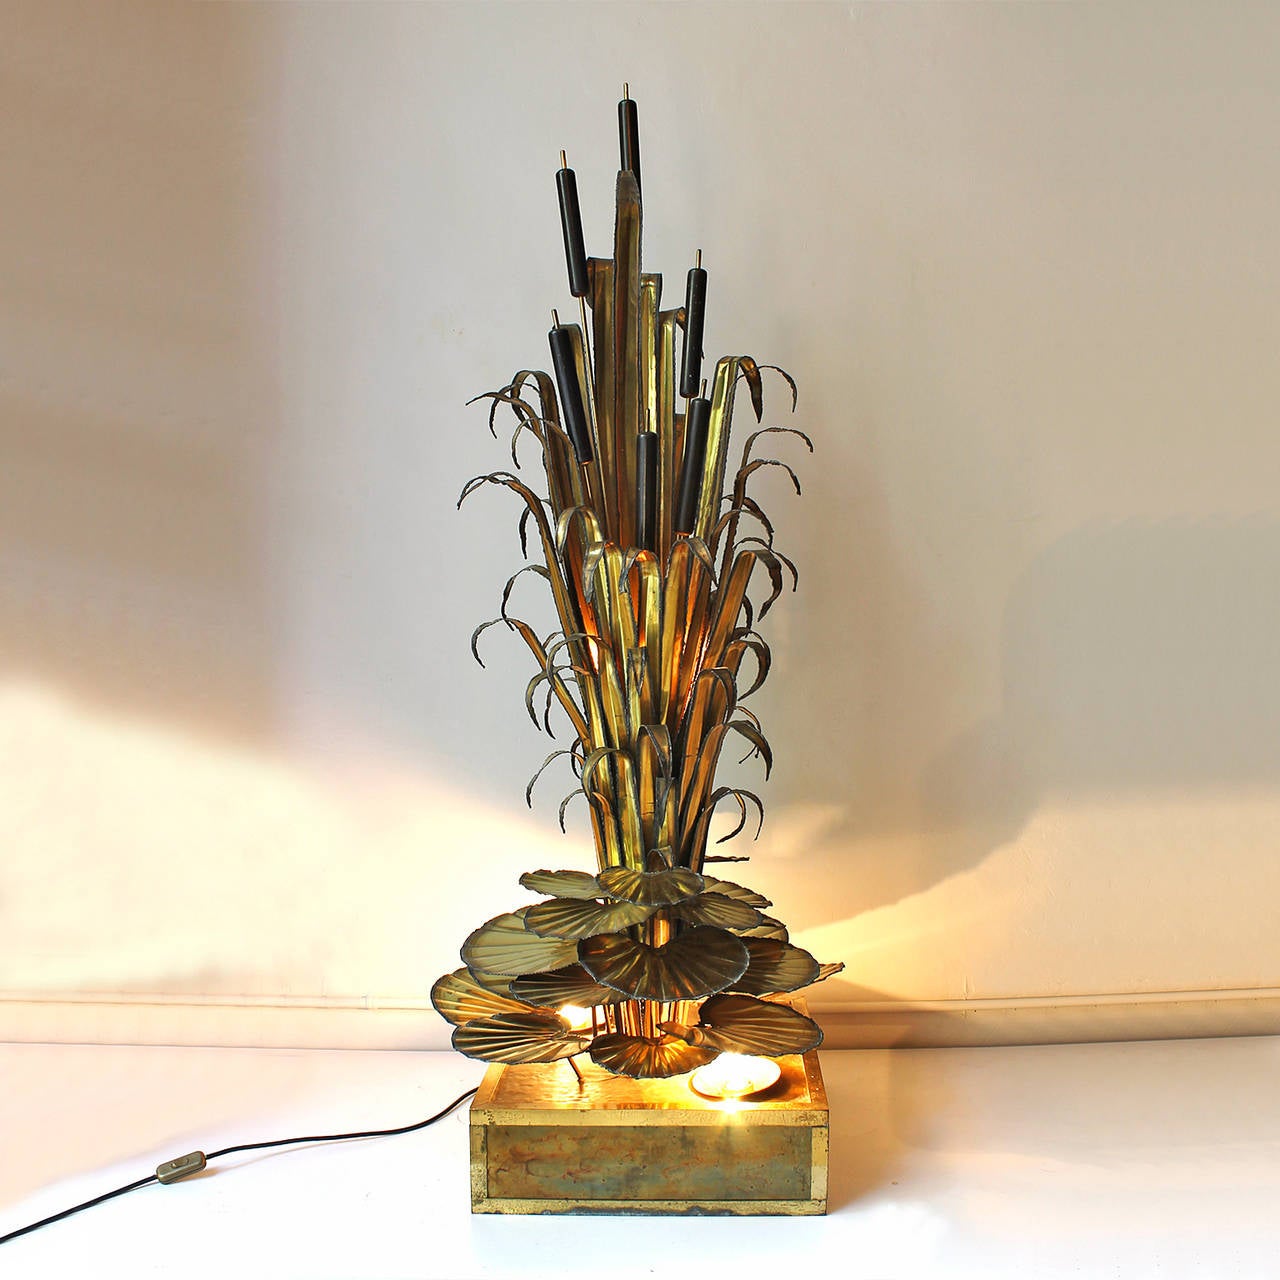 Exceptional standing lamp, reeds and water liies decoration, copper and wood, resin base covered with brass.
Attributed to Maison Jansen
France c. 1970